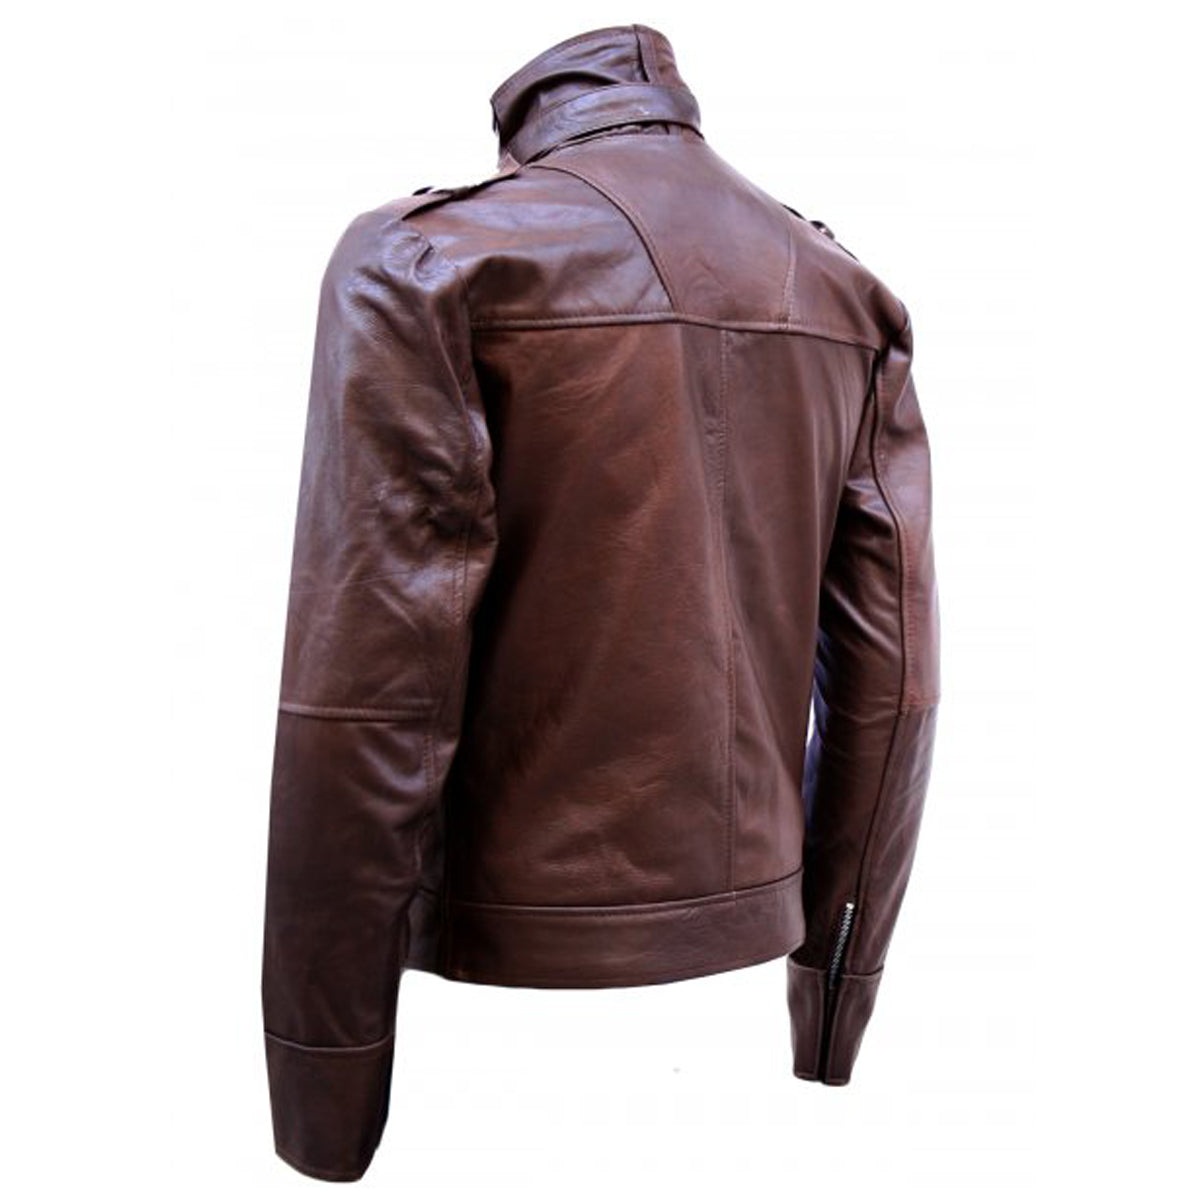 Chocolate Brown Men Leather Jacket - High Quality Leather Jackets For Sale | Dream Jackets On Jackethunt